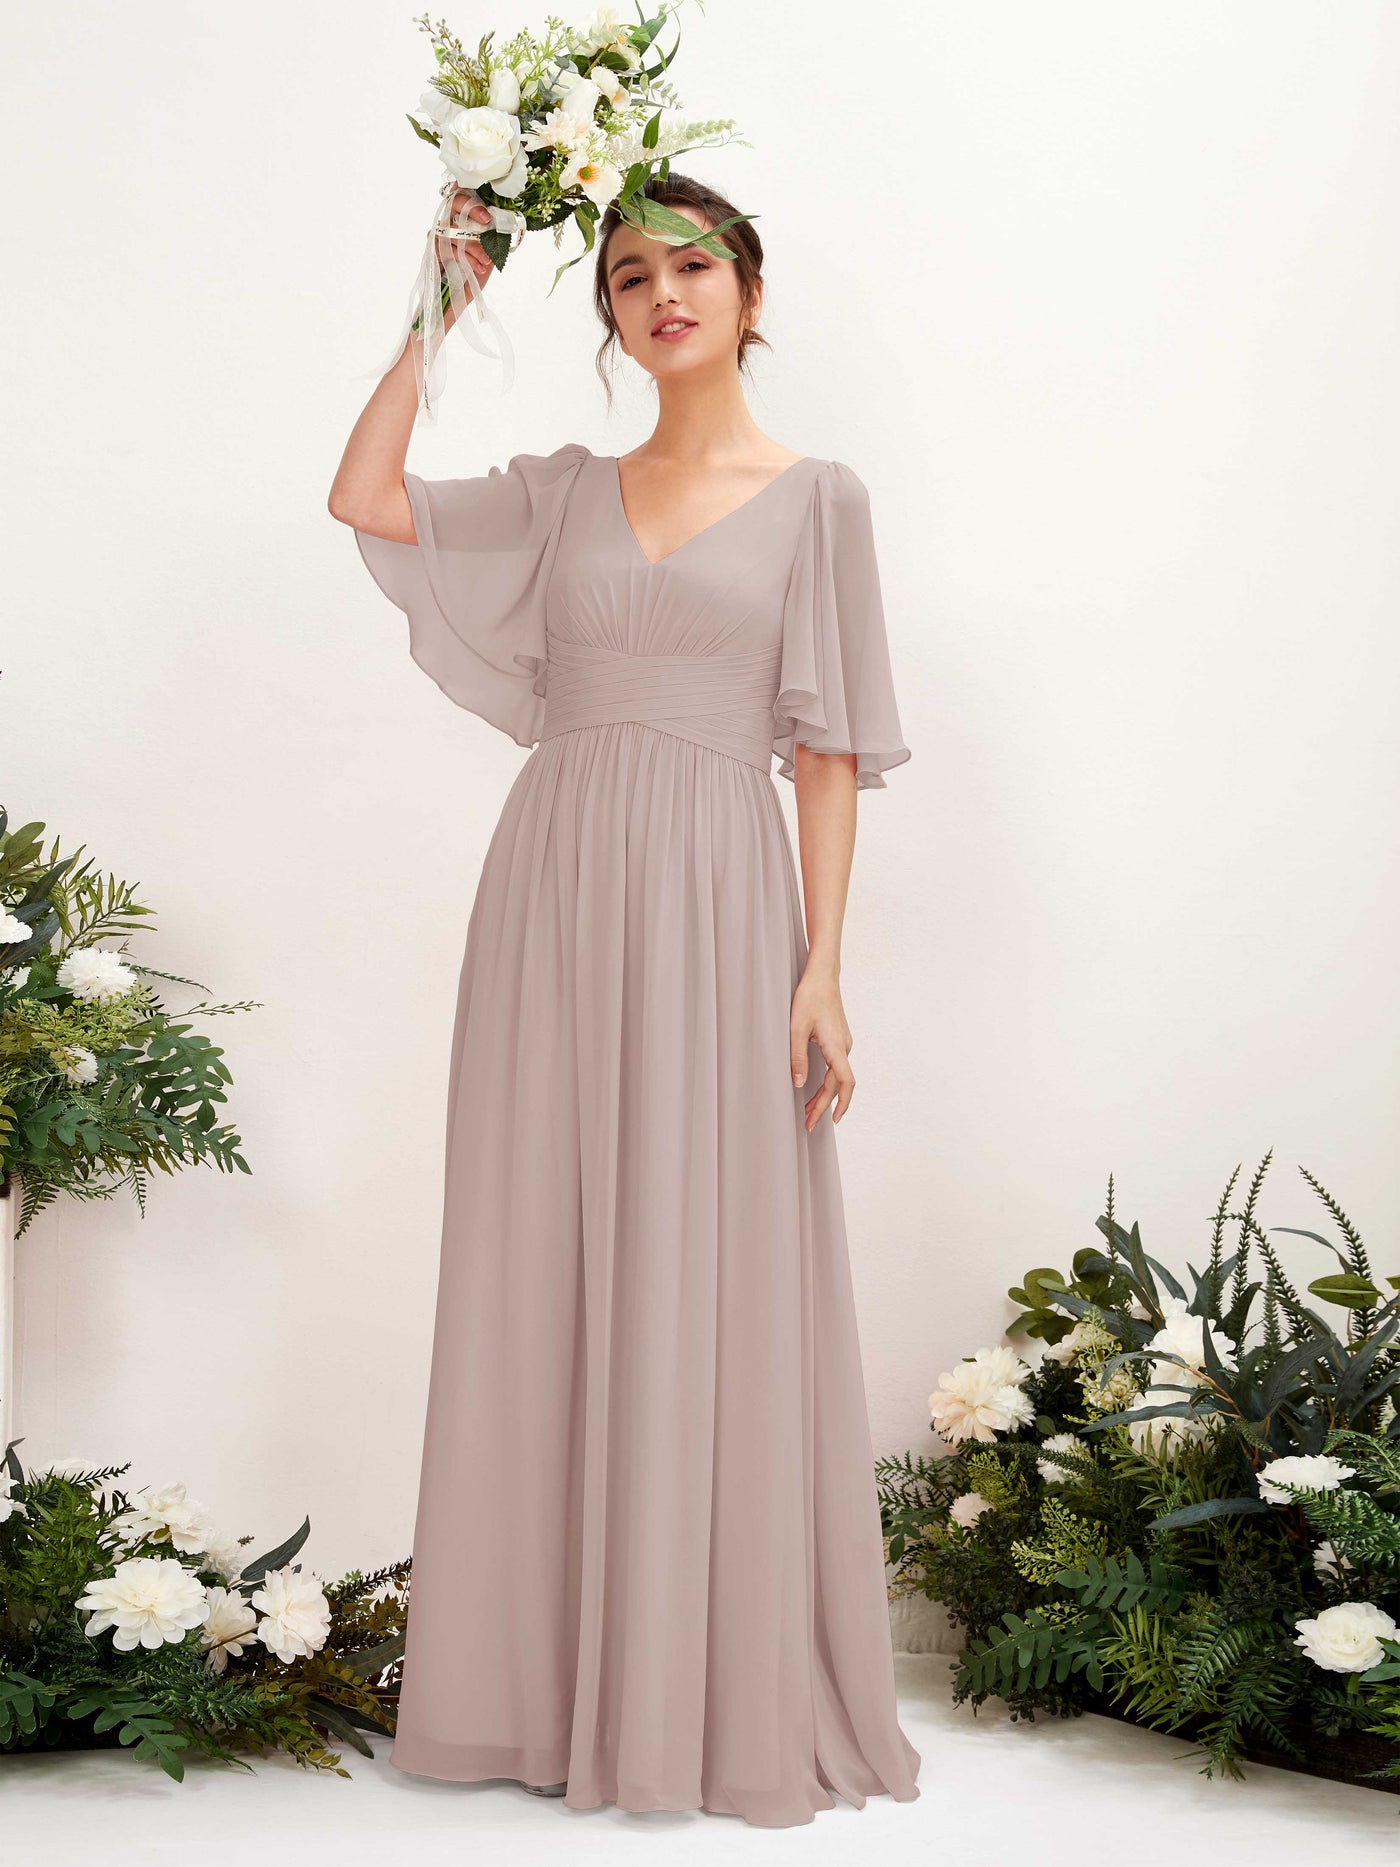 Taupe Bridesmaid Dresses Bridesmaid Dress A-line Chiffon V-neck Full Length 1/2 Sleeves Wedding Party Dress (81221624)#color_taupe